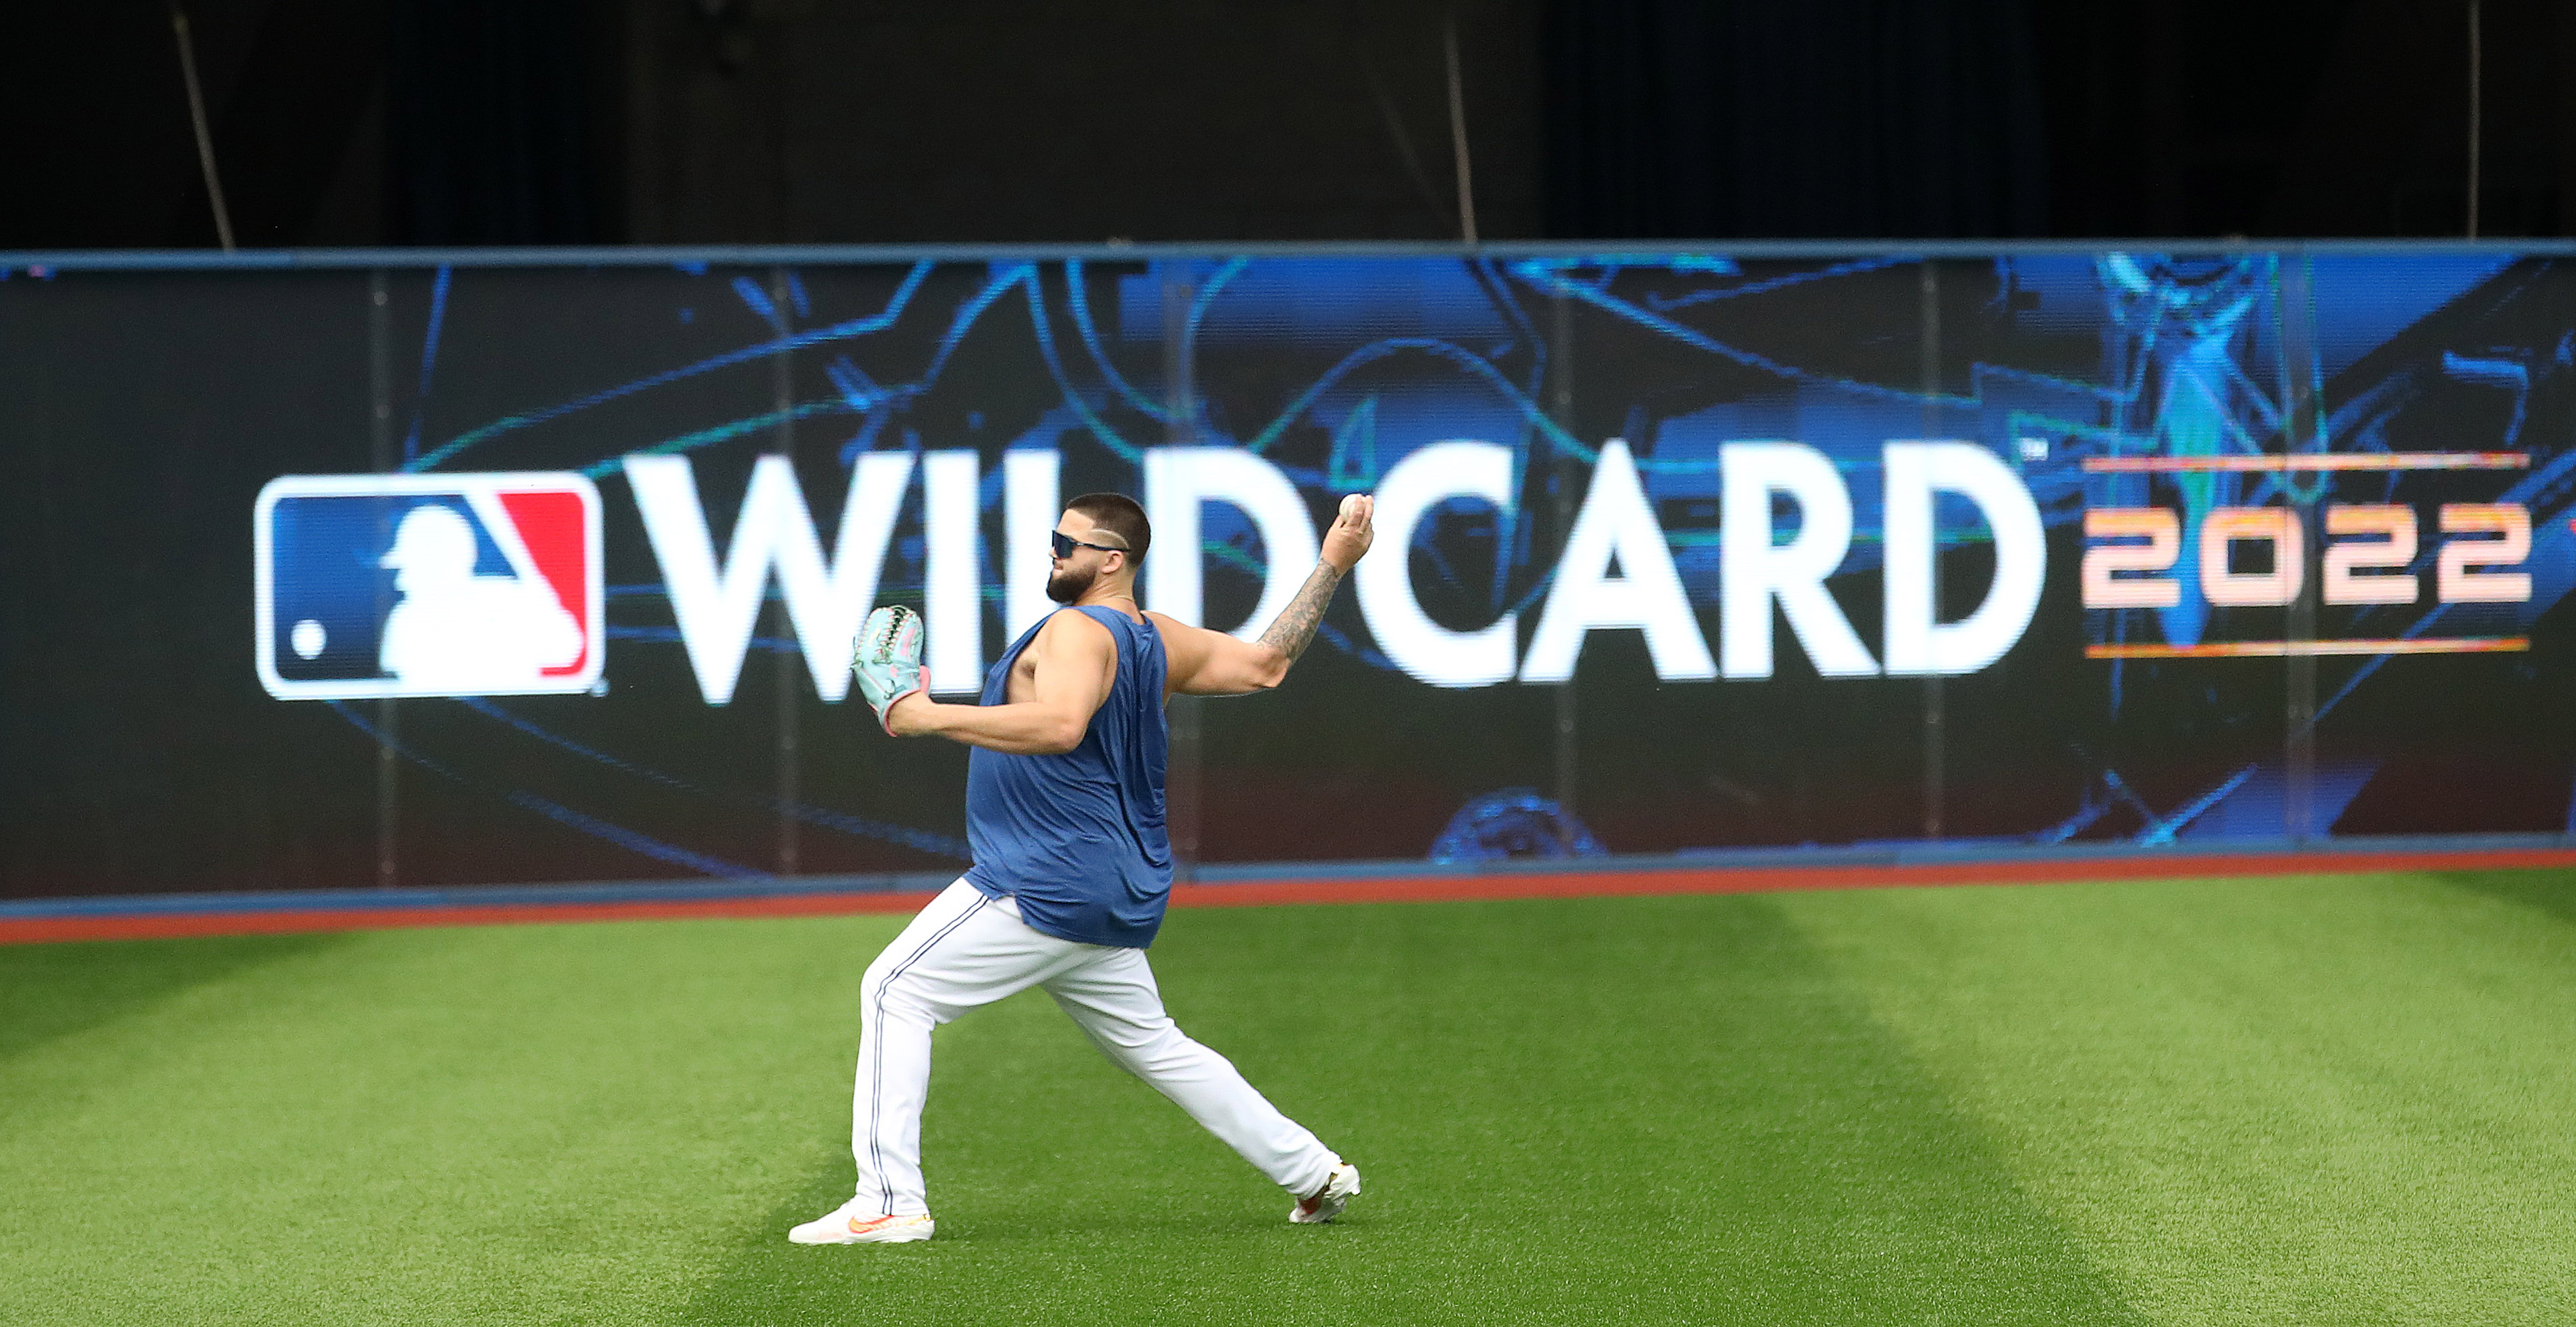 Toronto Blue Jays and the Seattle Mariners practice on the eve of their American League Wild Card series